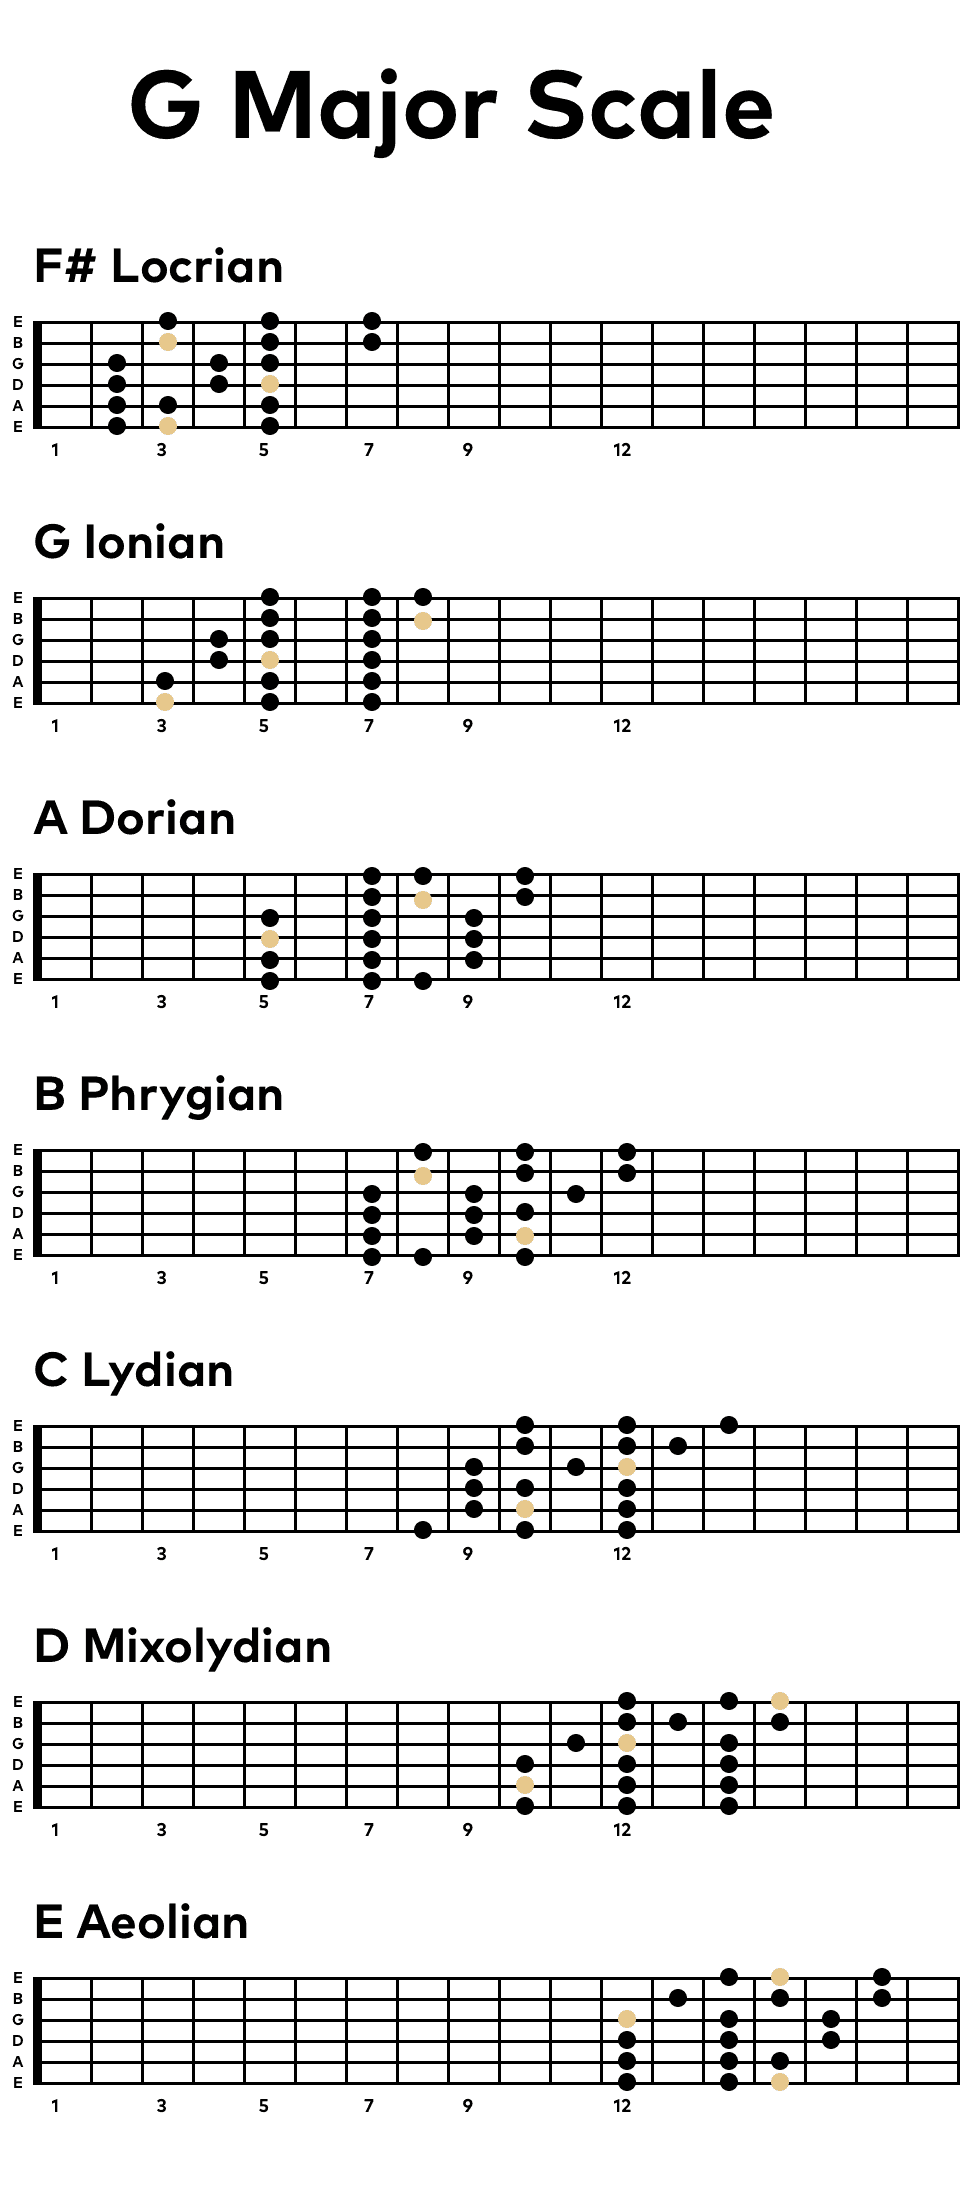 The 7 Patterns of the G Major Scale on the Guitar